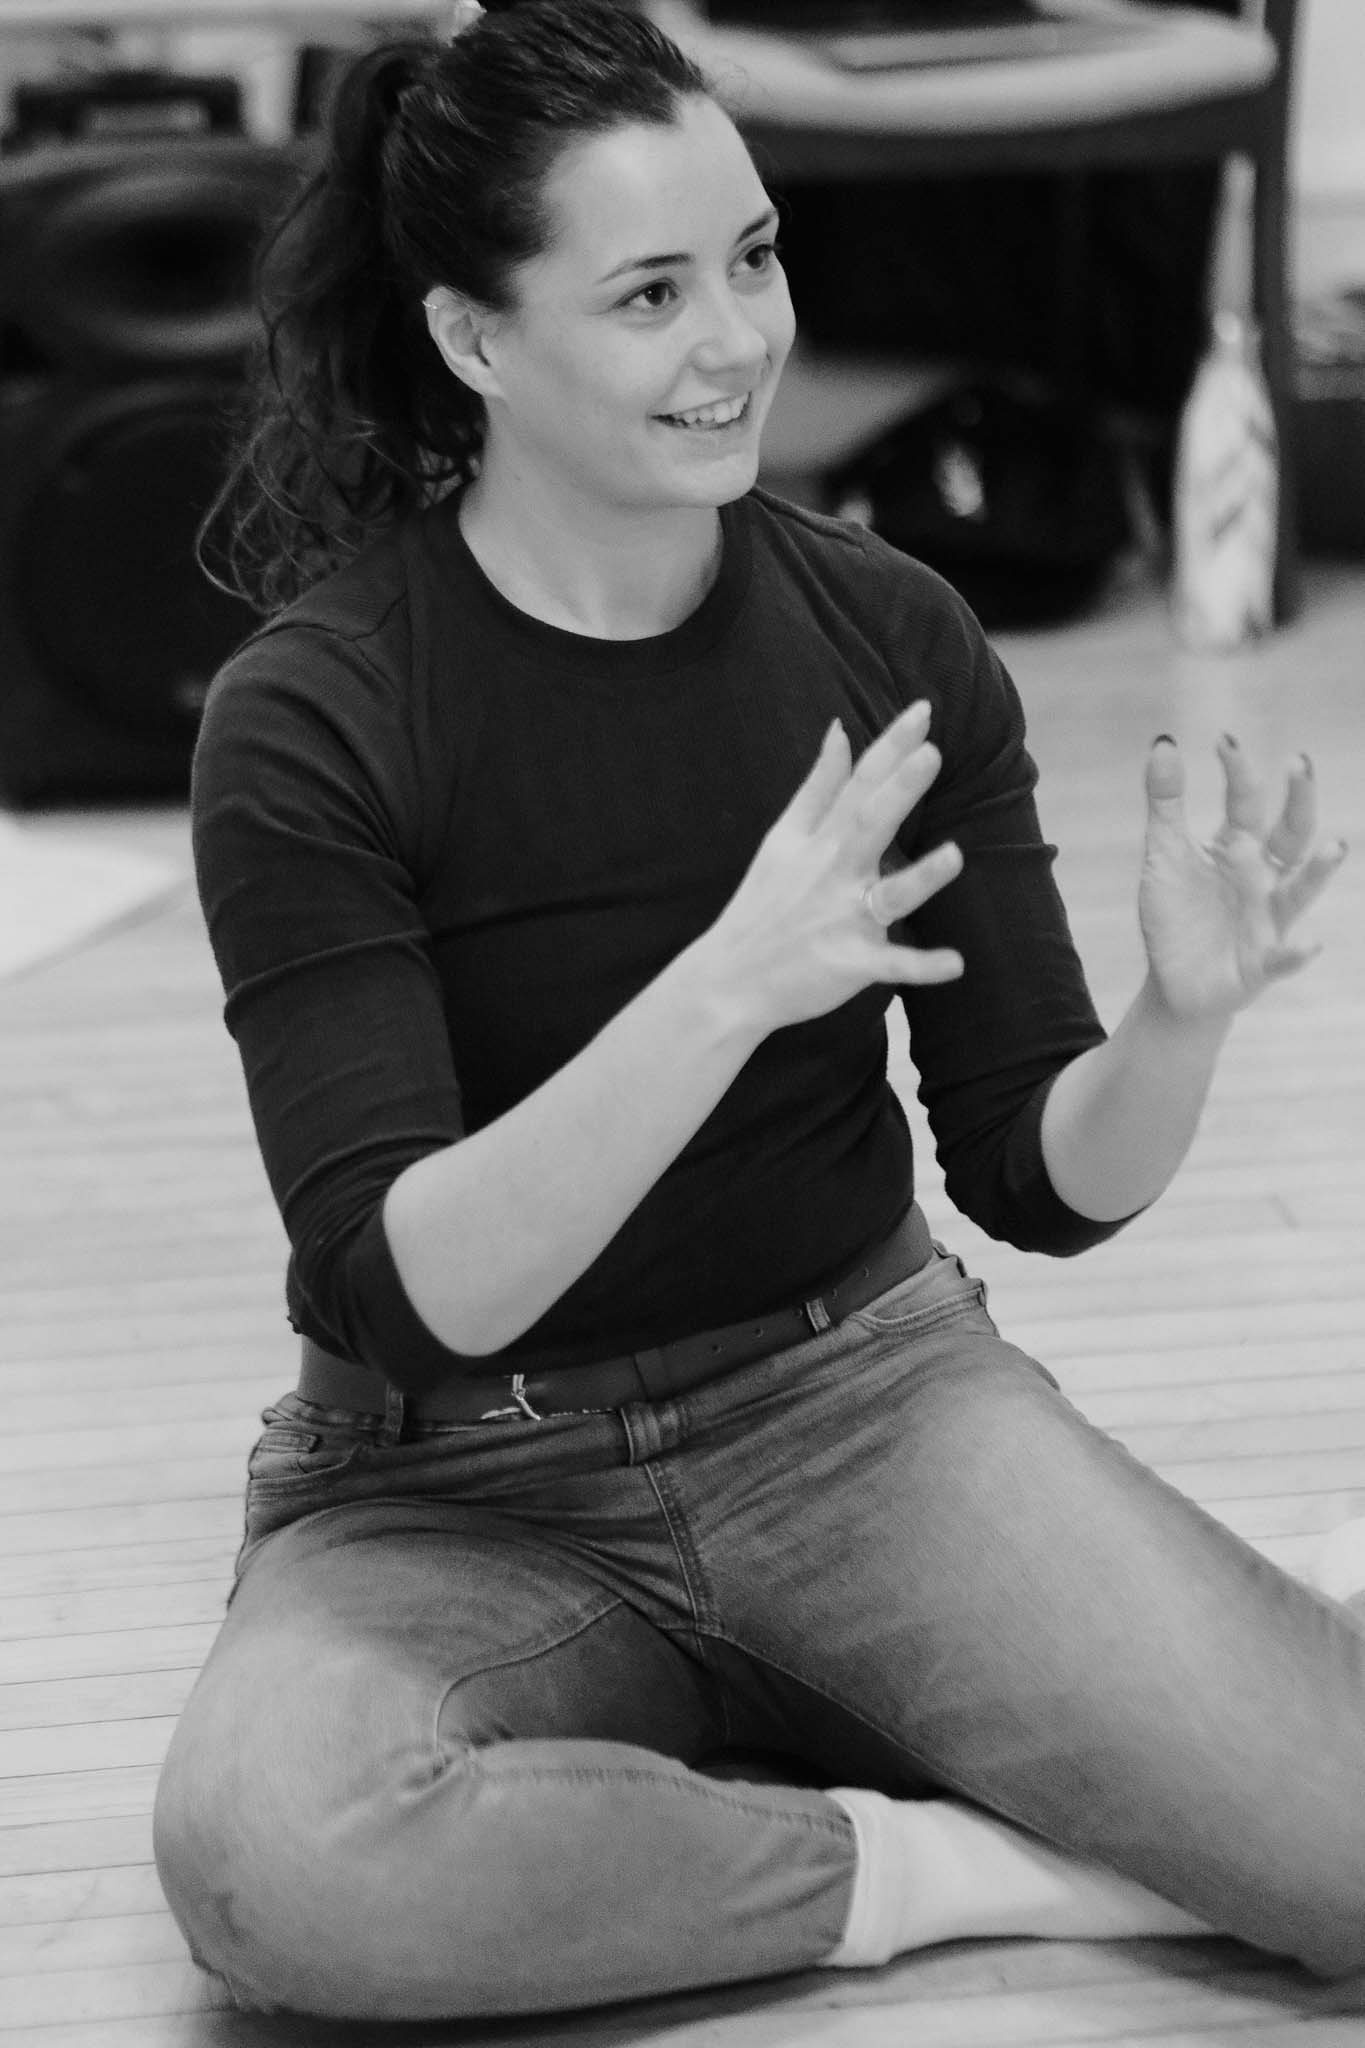 A picture of a young woman sat on the floor, smiling with her hands reaching out. It looks as though she is shaping something with her hands